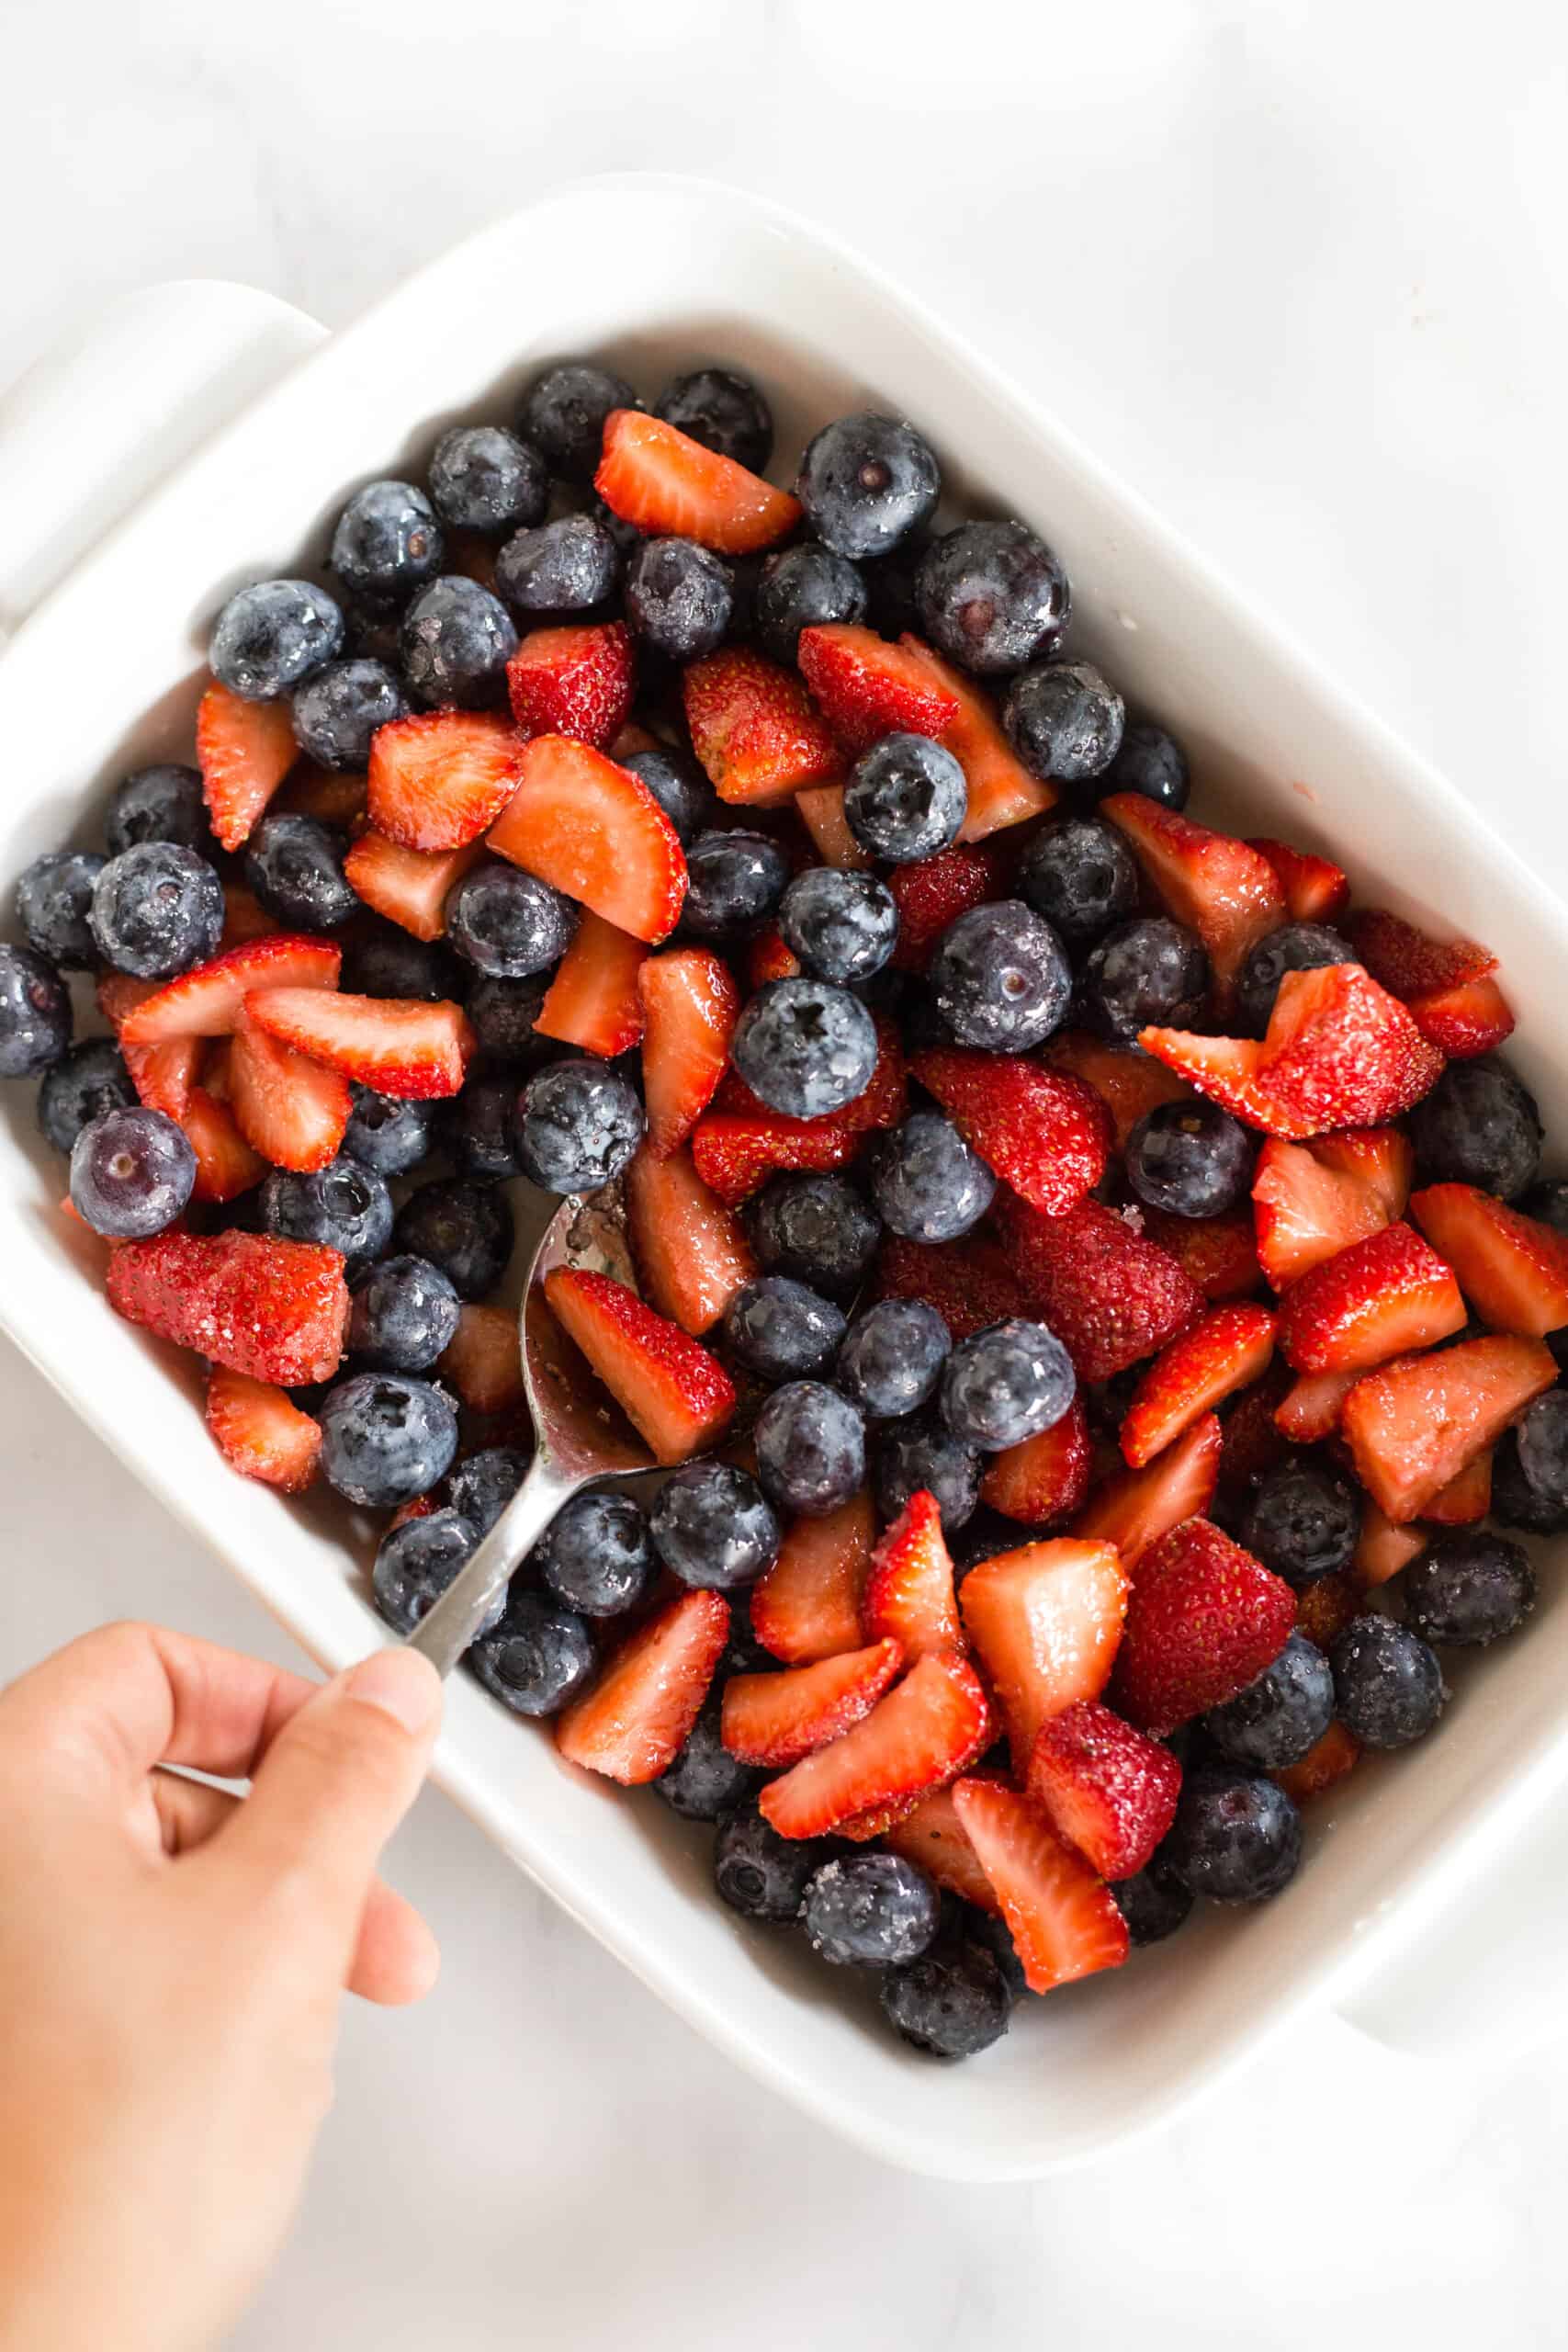 Mixing berries in a large rectangle baking dish.